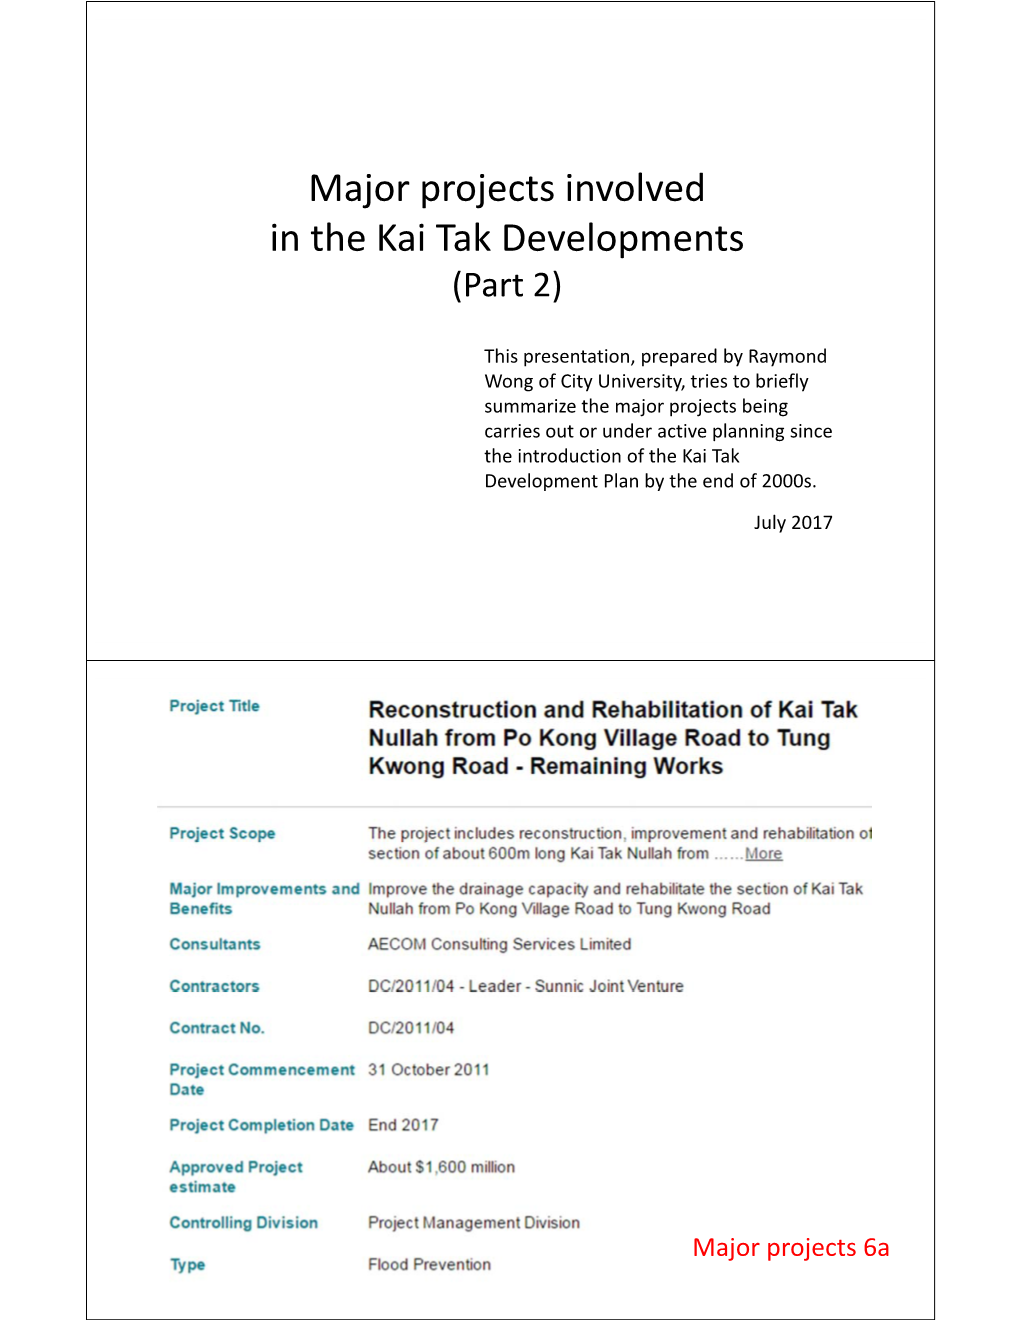 Major Projects Involved in the Kai Tak Developments (Part 2)